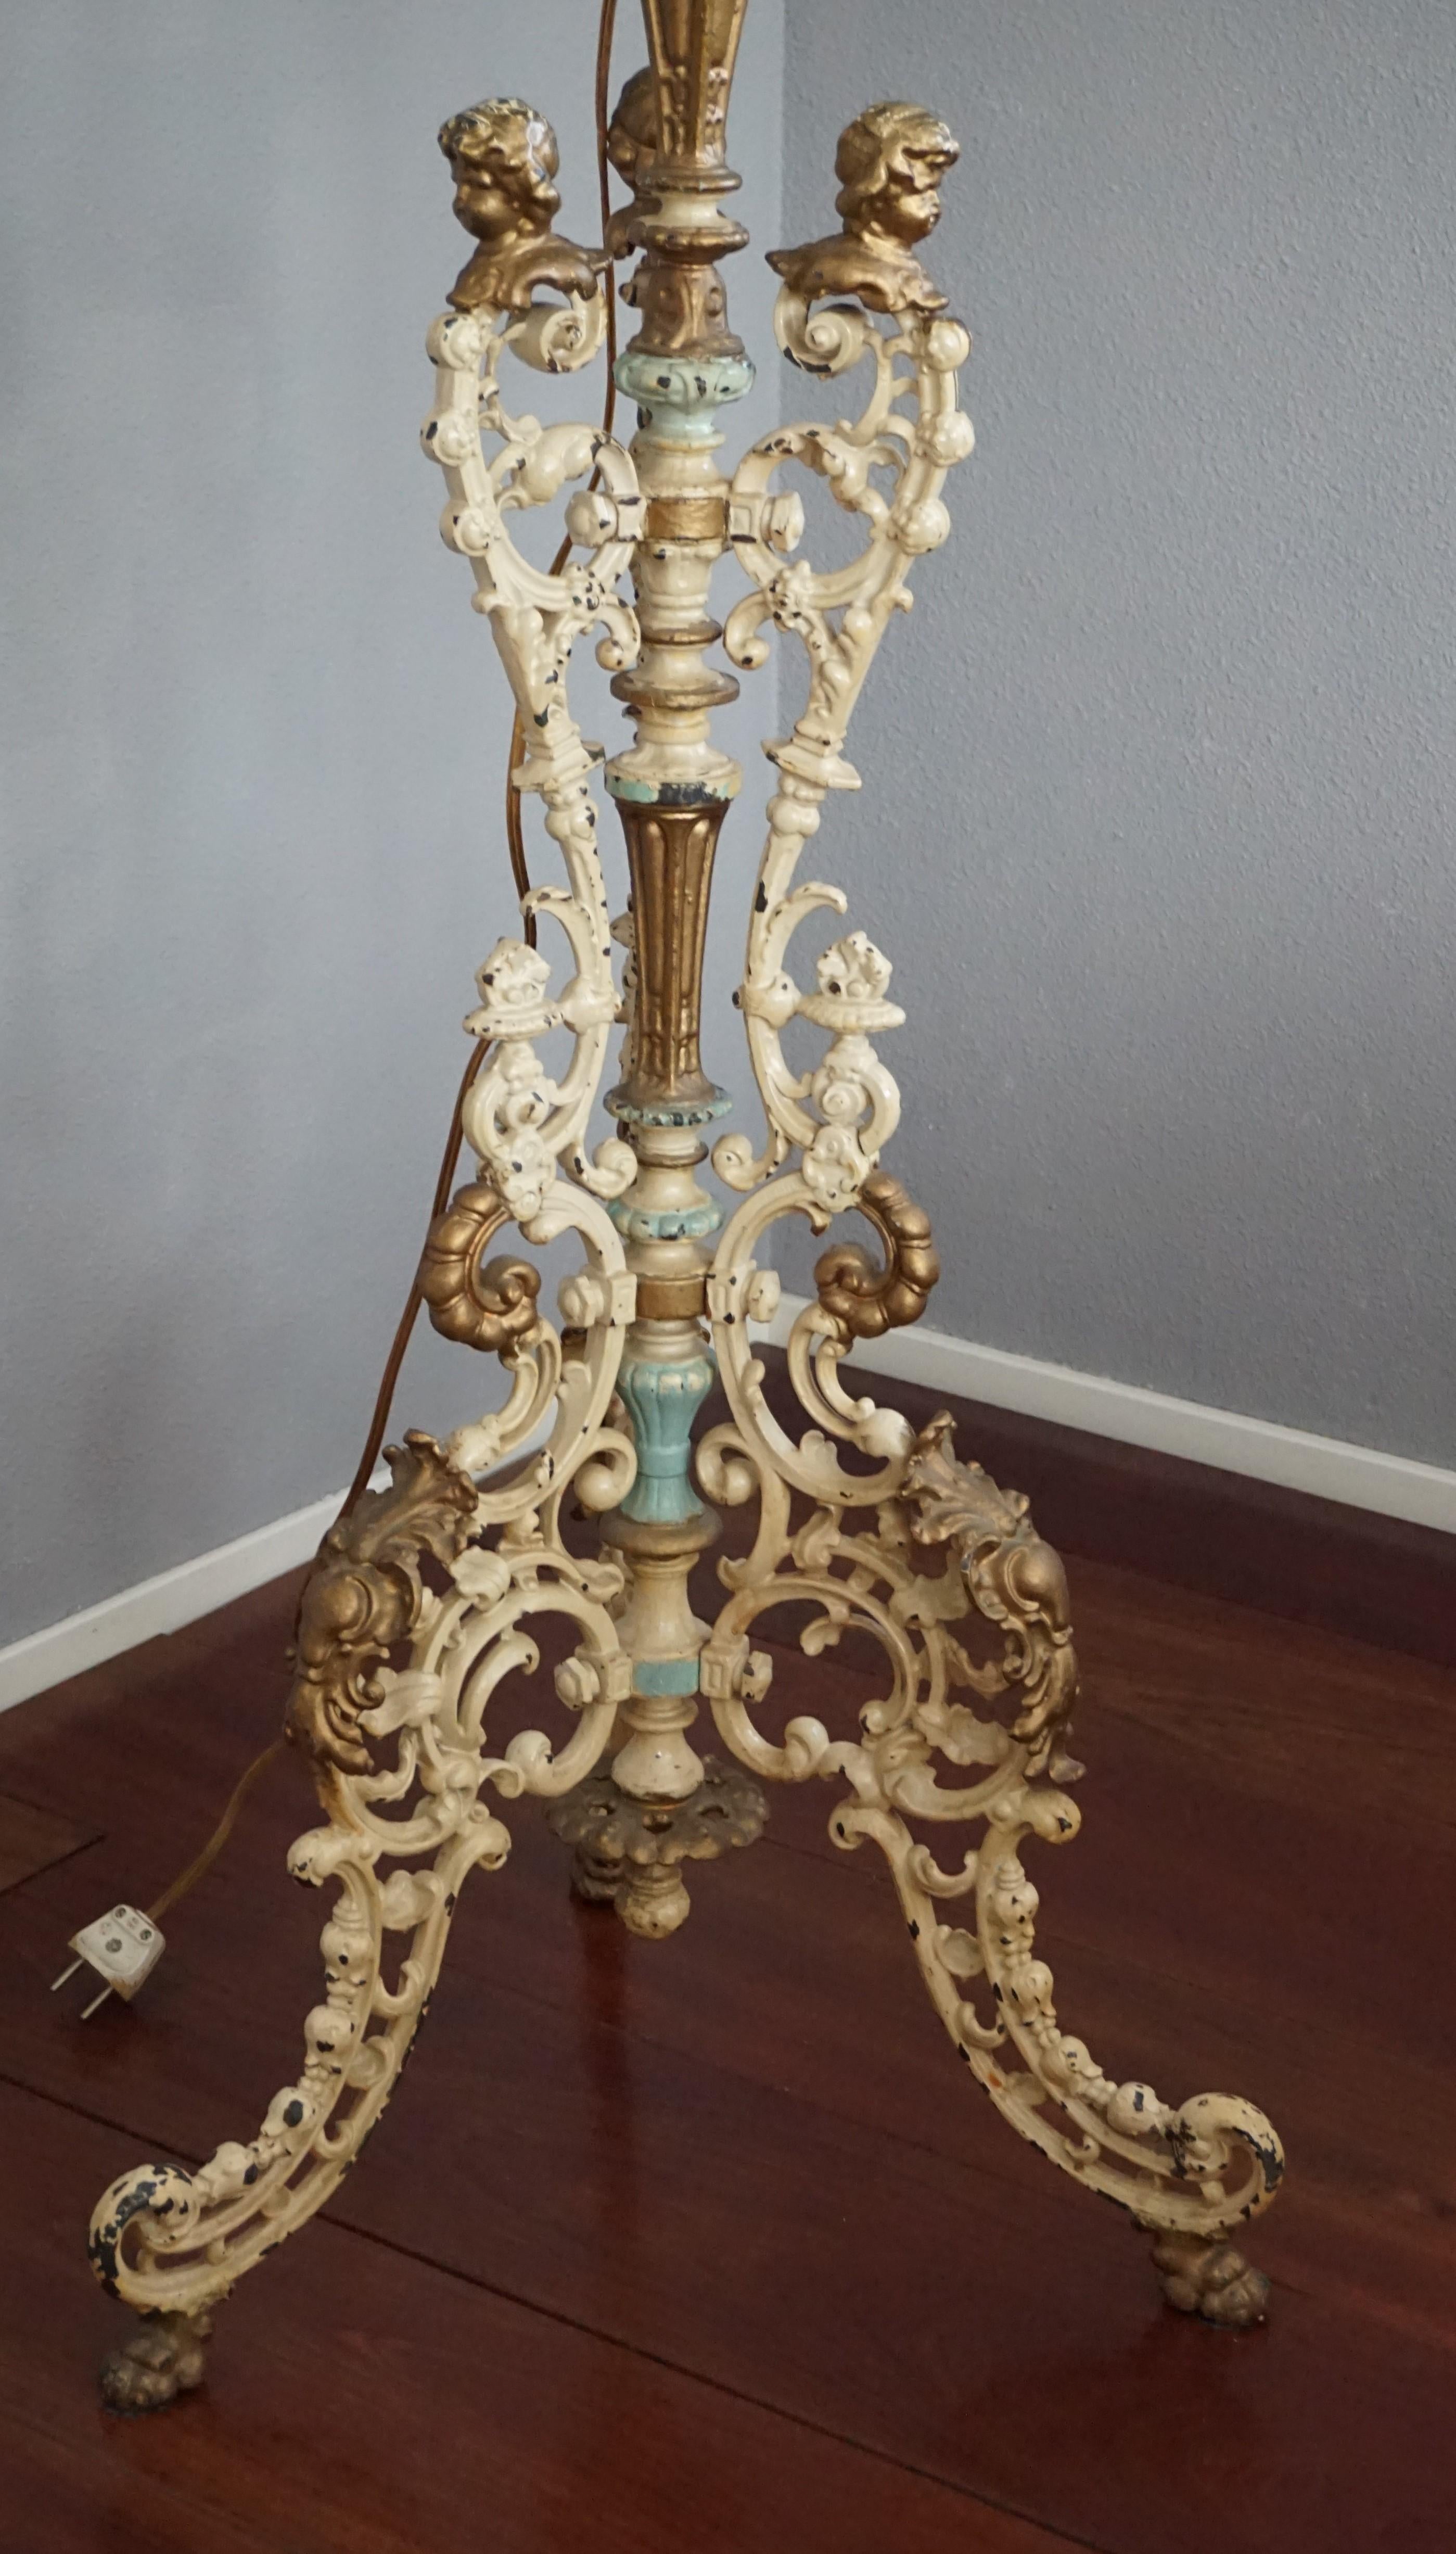 Brass Antique and Painted Cast Iron Baroque Revival Floor Lamp w. Putti Bust Sculpture For Sale